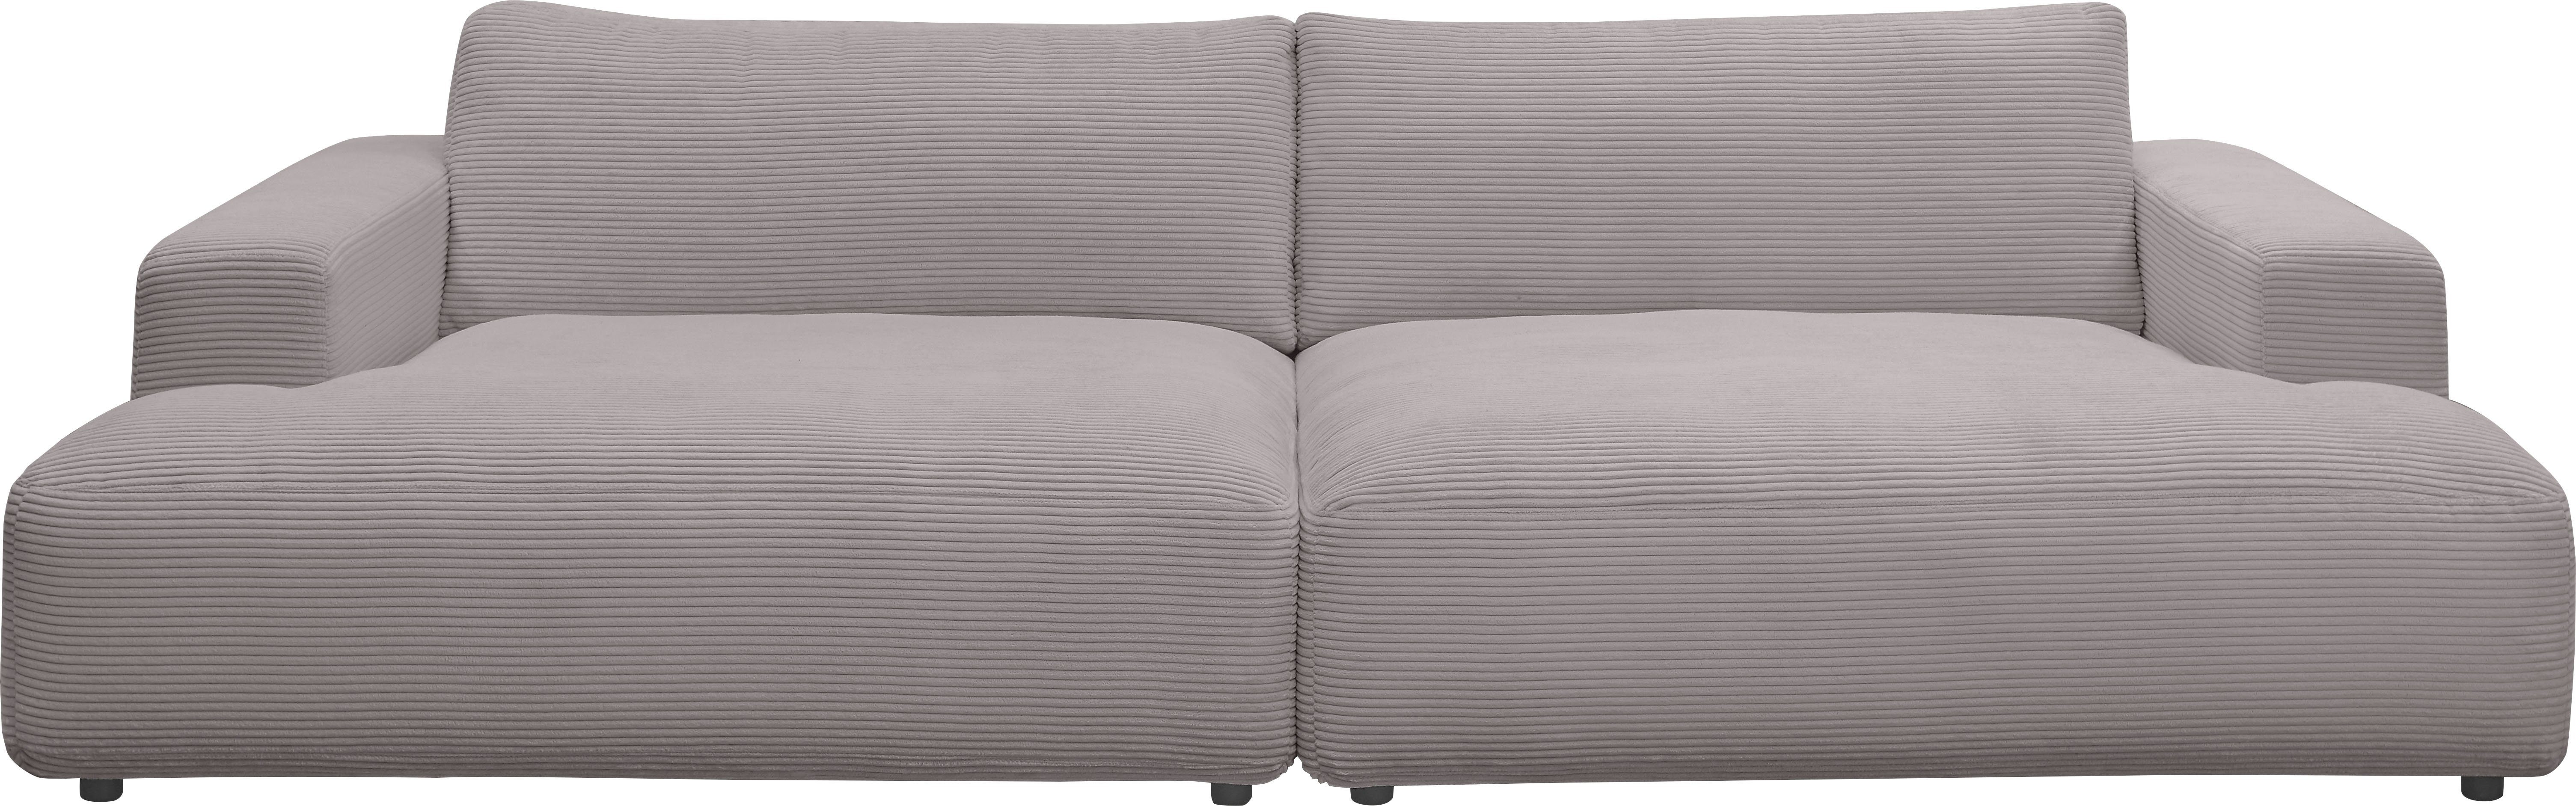 Musterring cm by M Lucia, Cord-Bezug, 292 Loungesofa GALLERY Breite branded grey